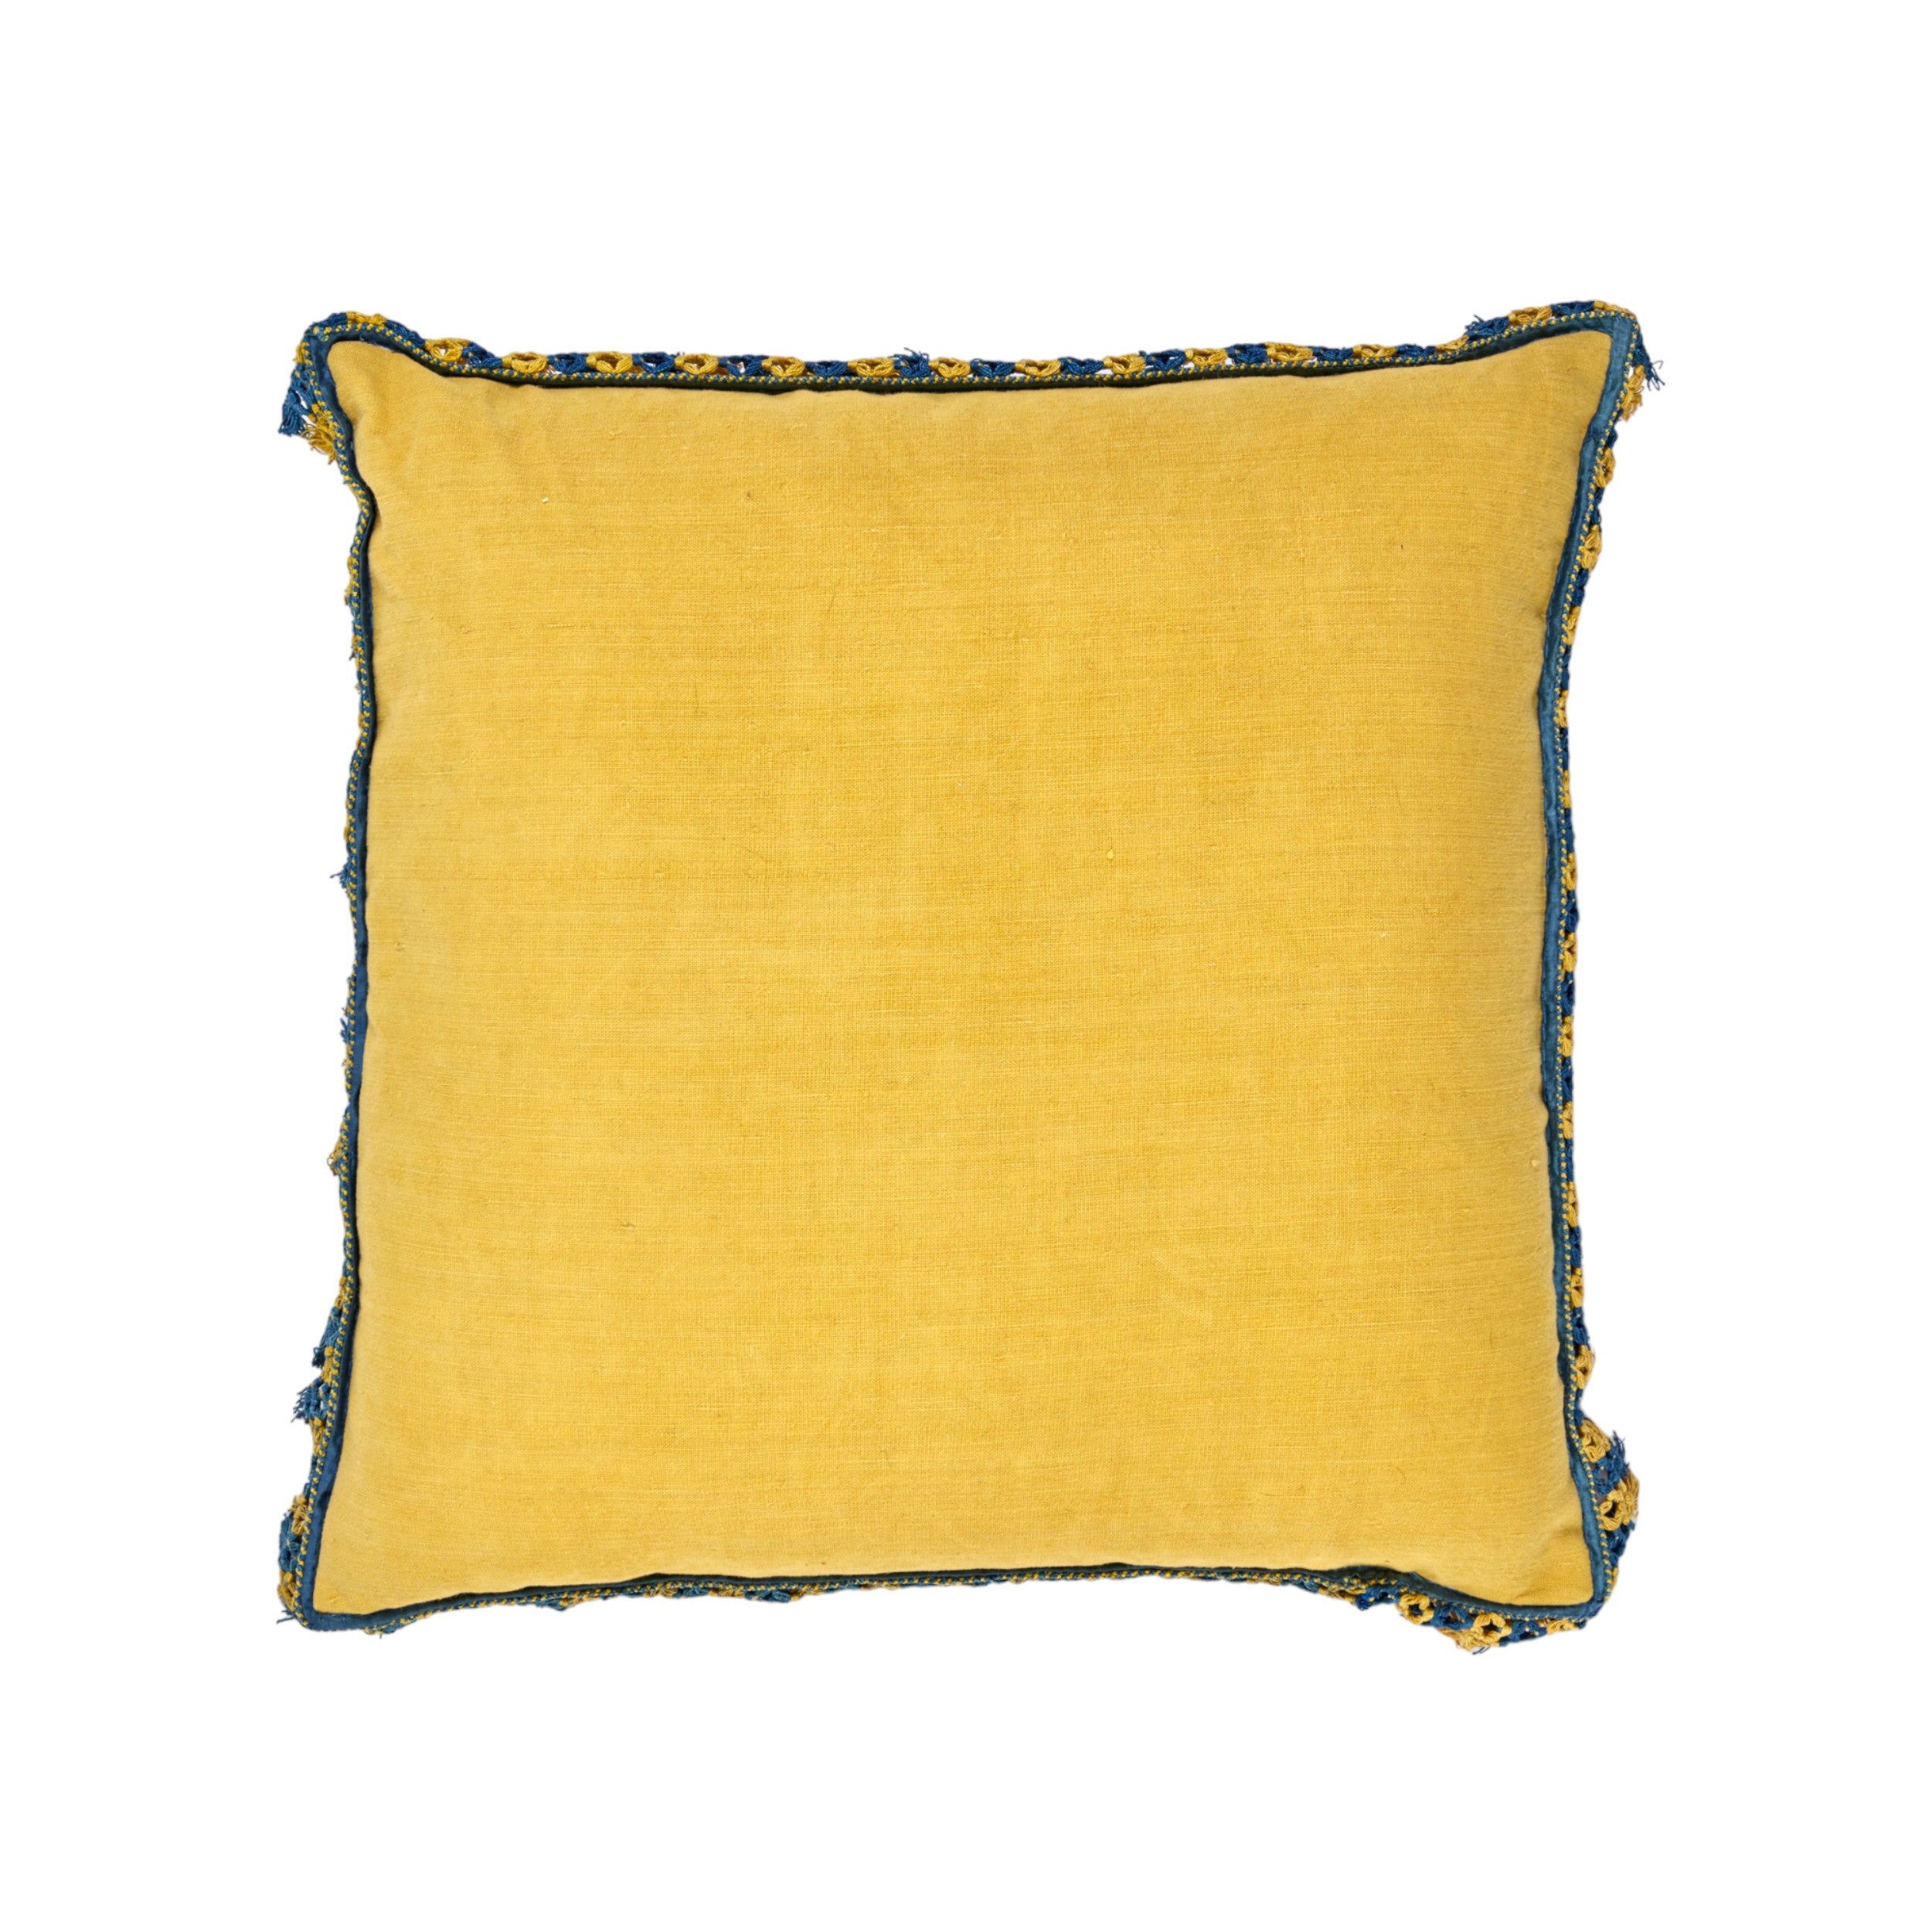 A Pair of Square Vivid Yellow Damask Cushions with Original Tassel Fringe and Binding